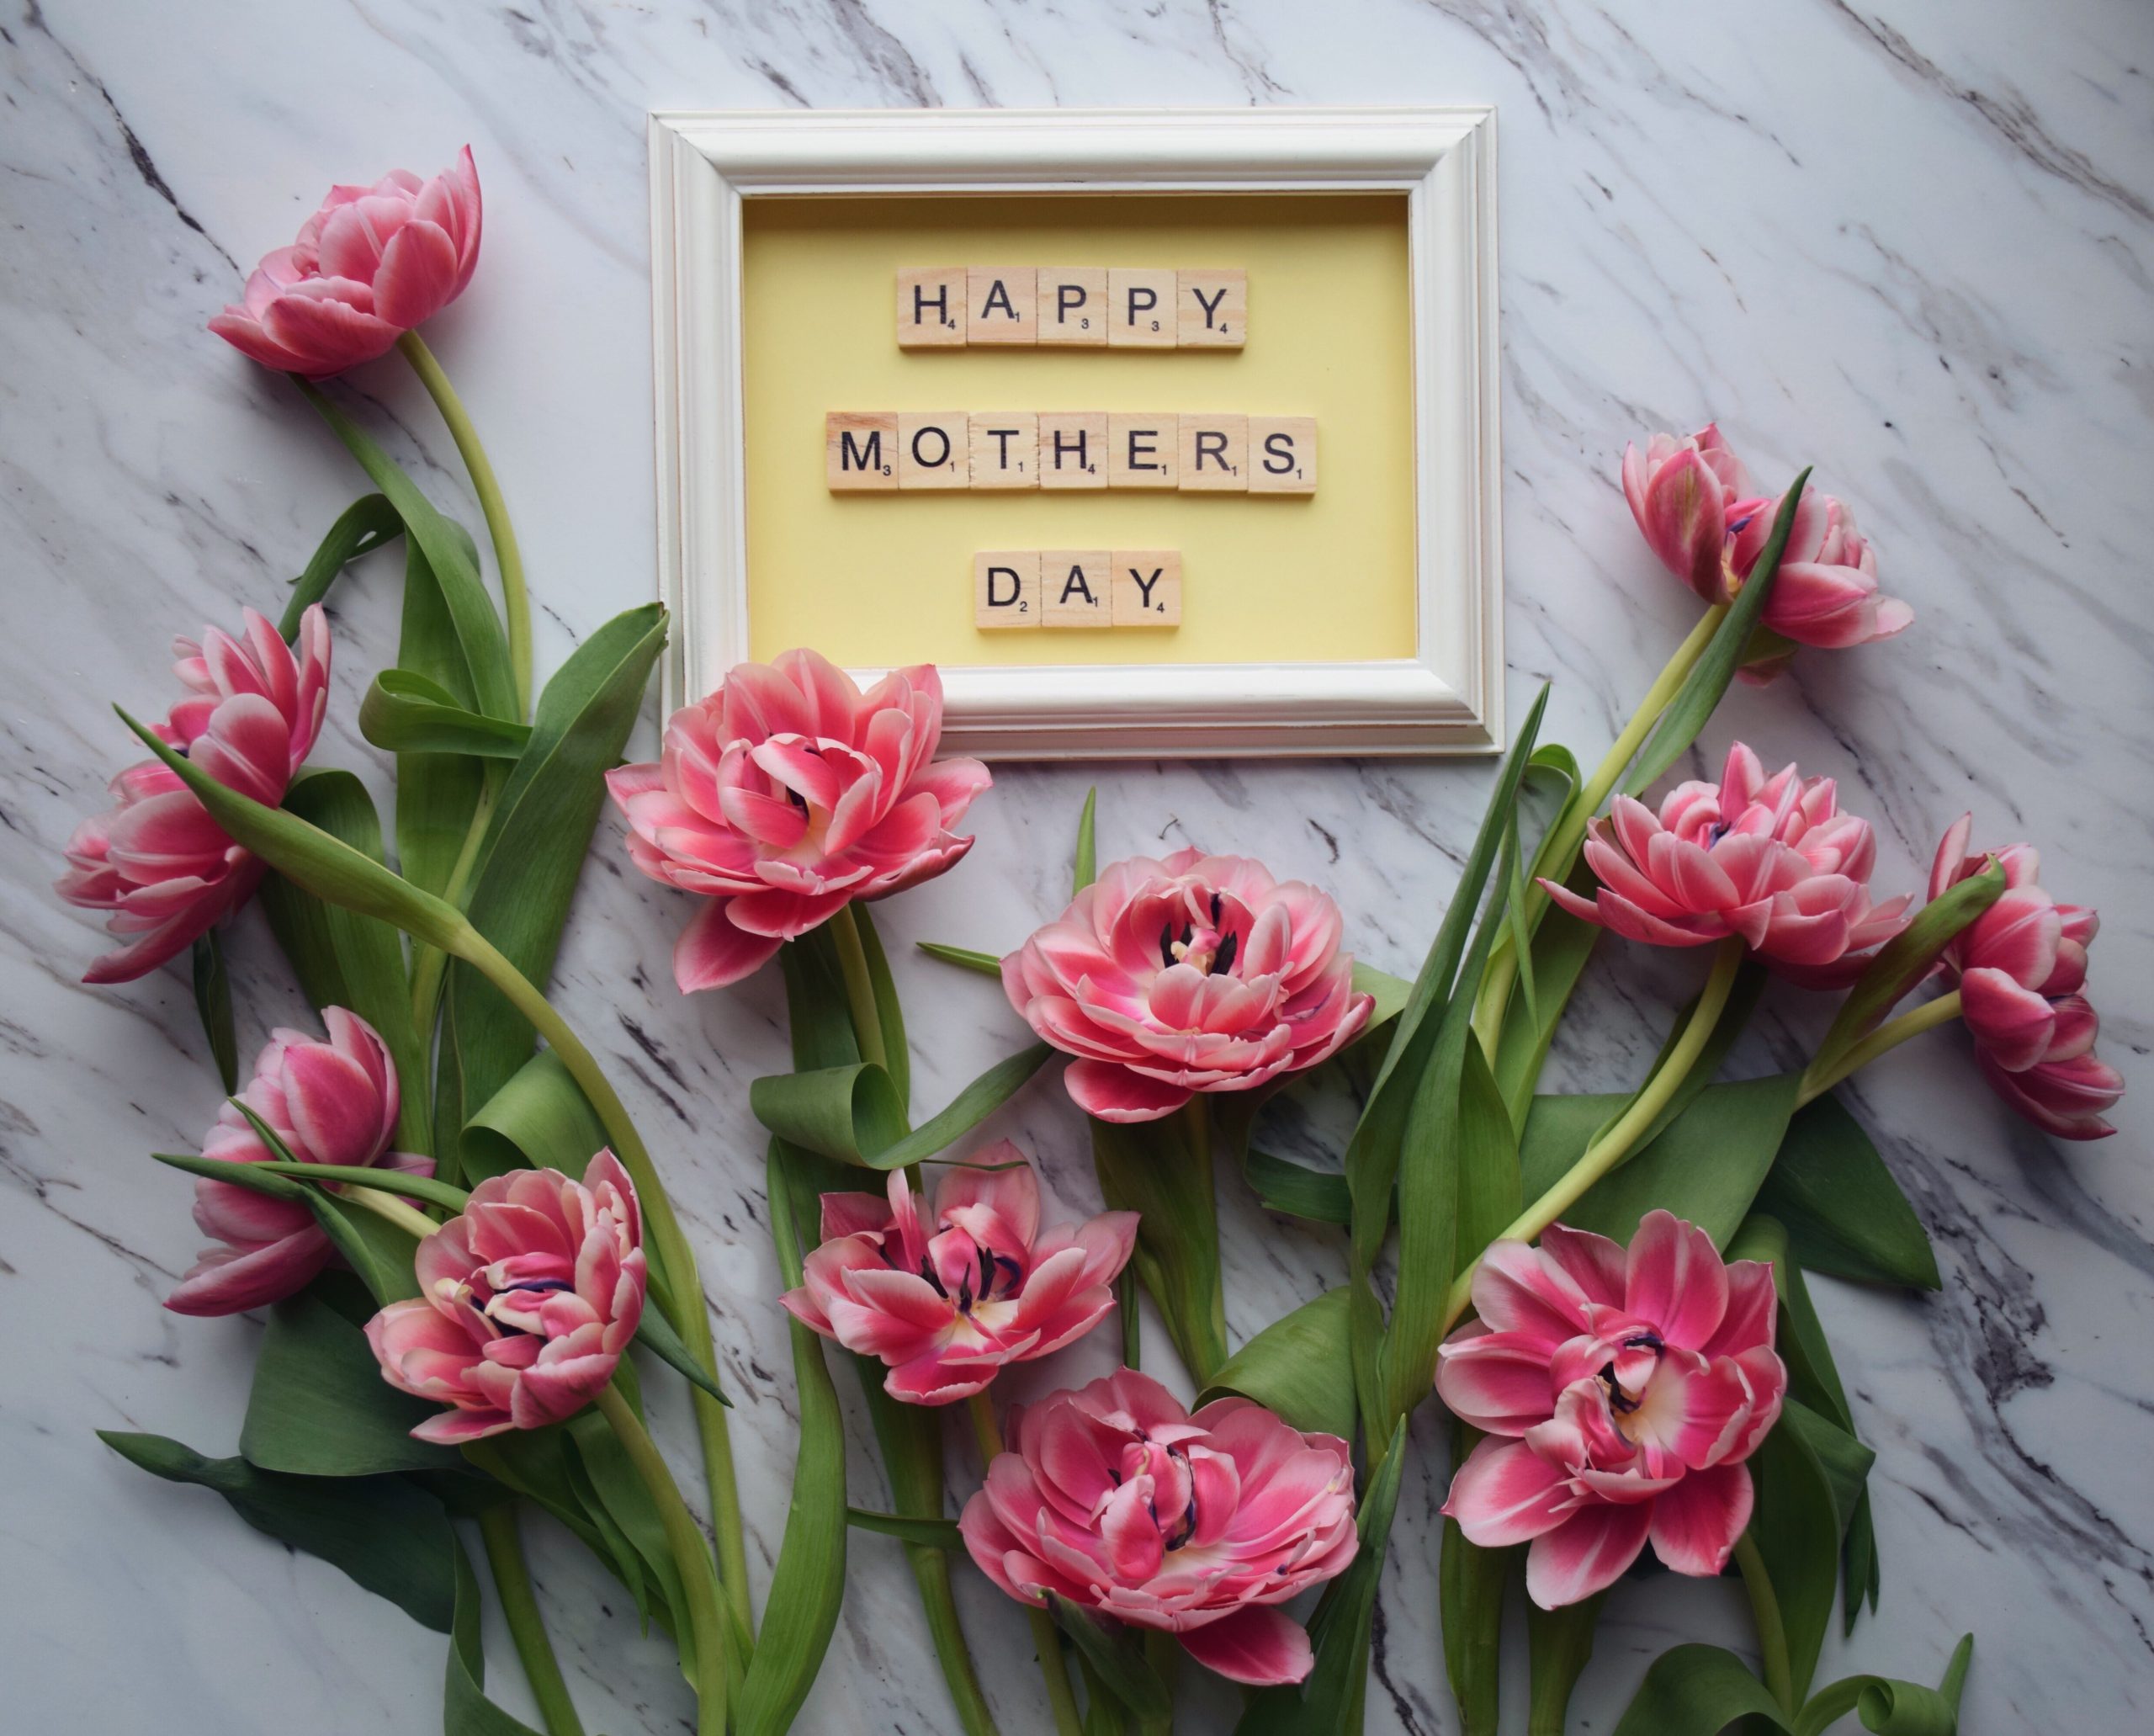 Happy Mother's Day Flower Basket